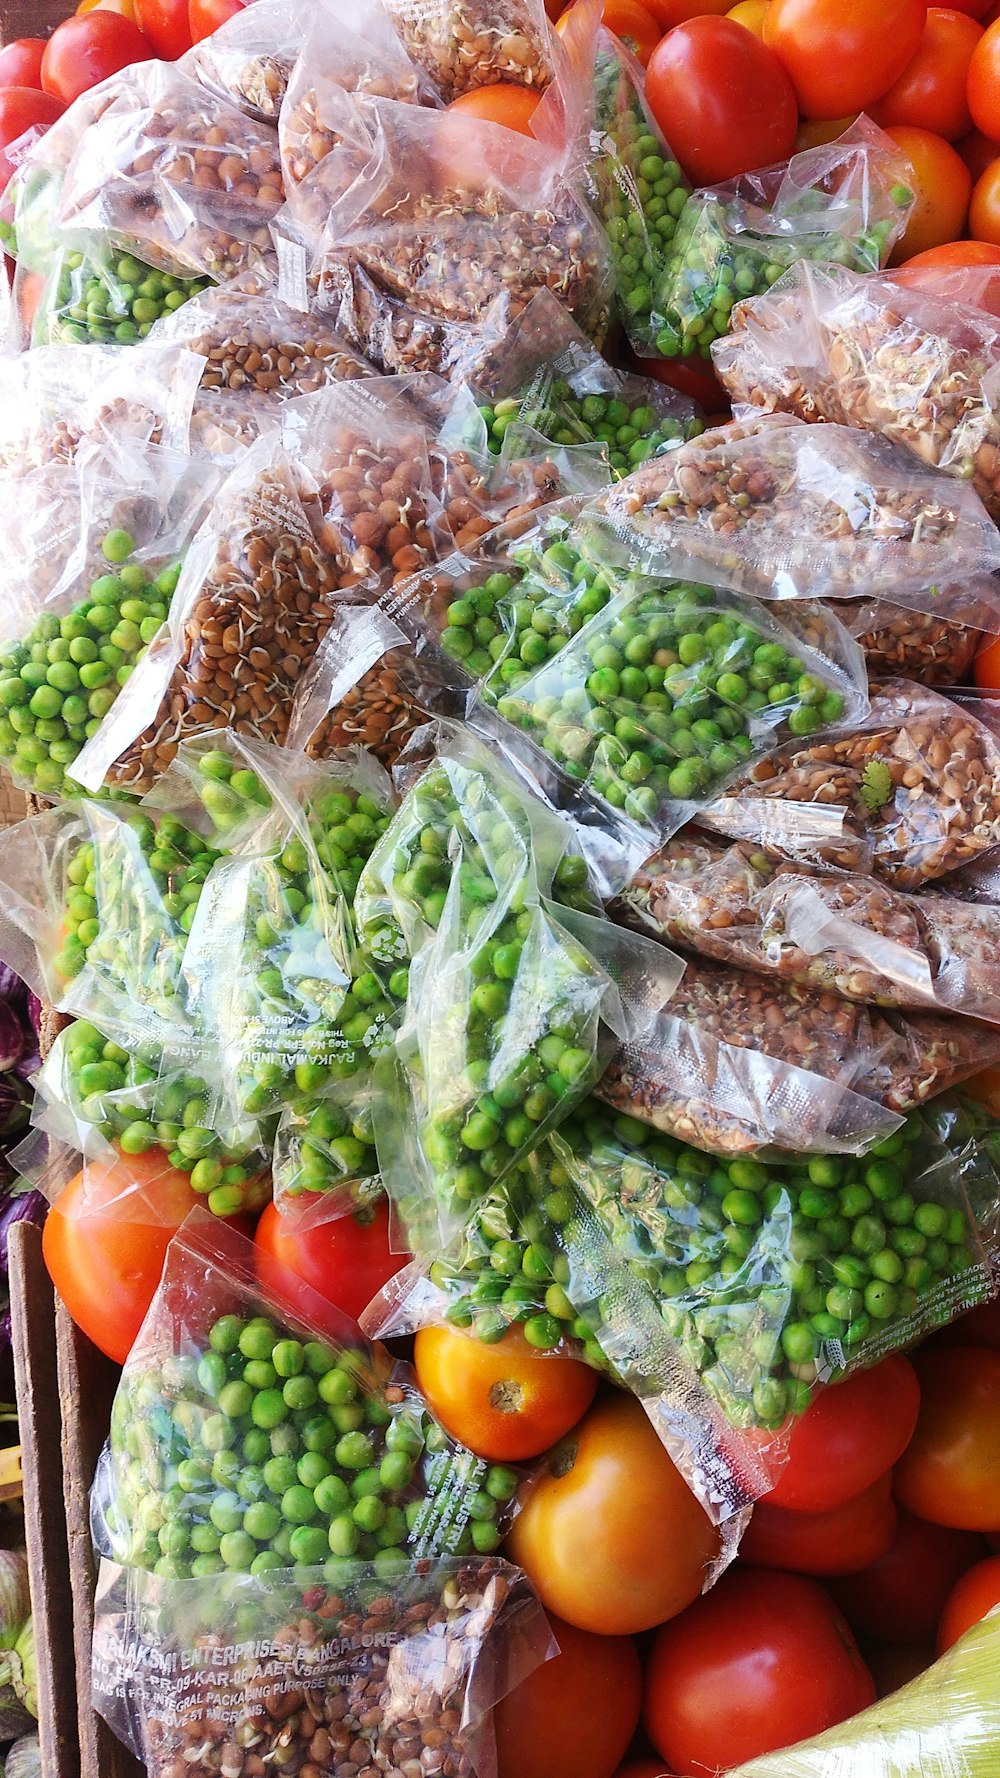 a pile of bags filled with lots of different types of vegetables